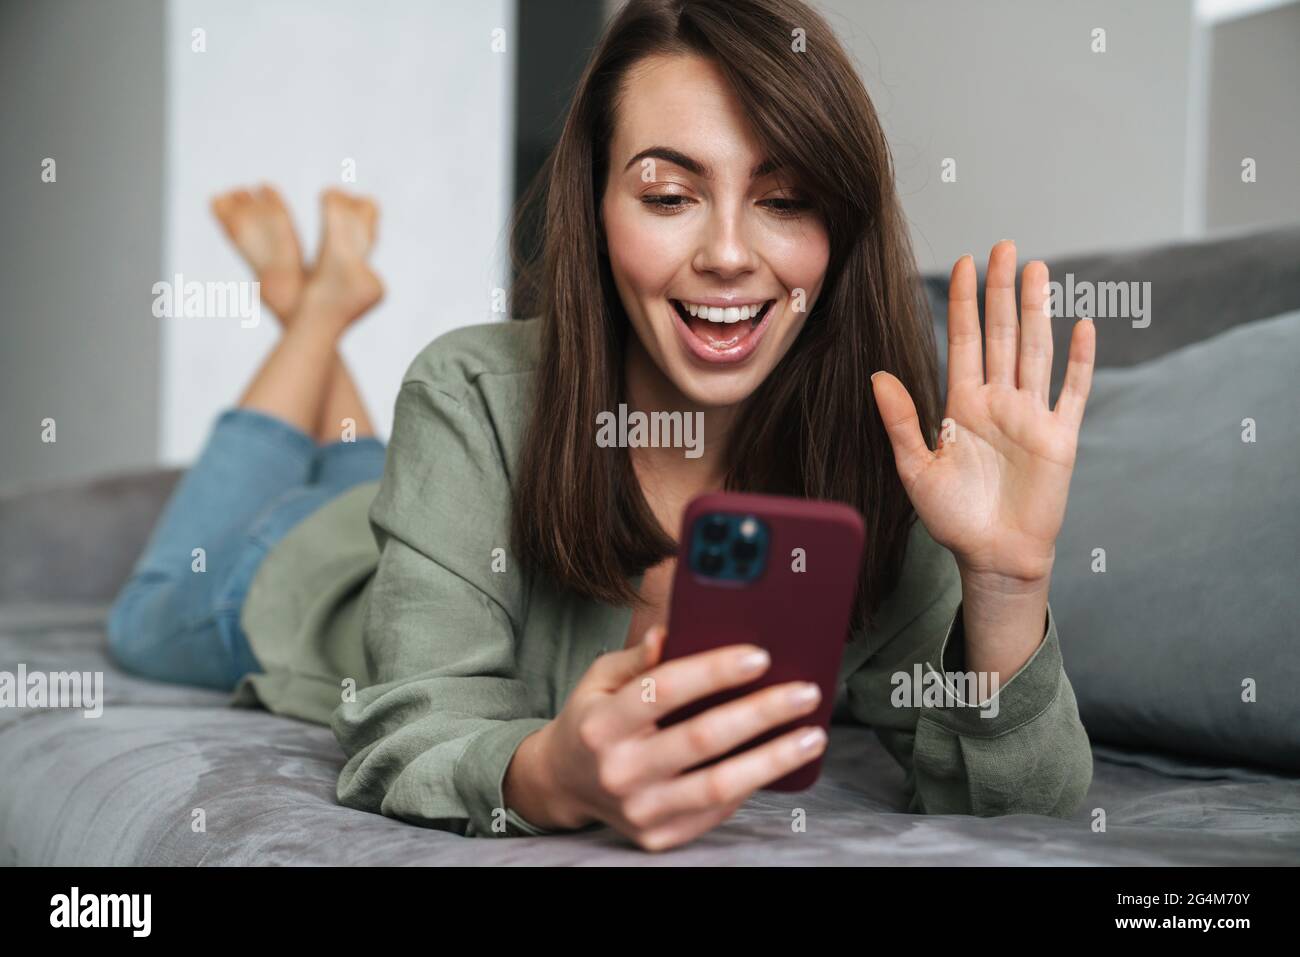 Young smiling woman gesturing and using mobile phone while lying on sofa at home Stock Photo